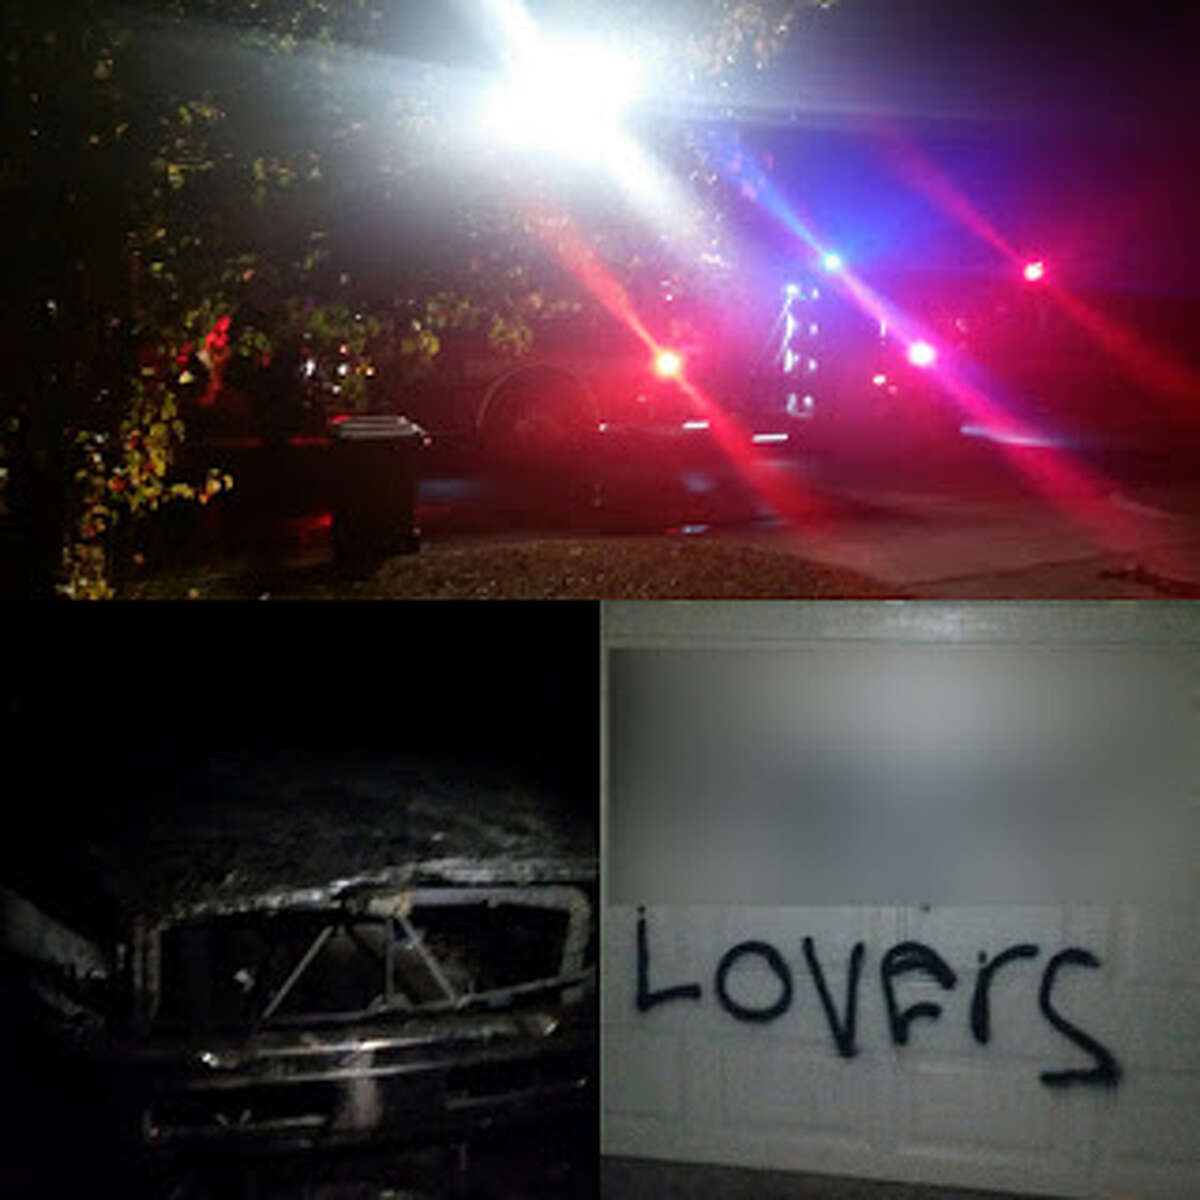 Jenny Williams said, "N----- lovers" was spray-painted across her family's garage Dec. 12, 2016.